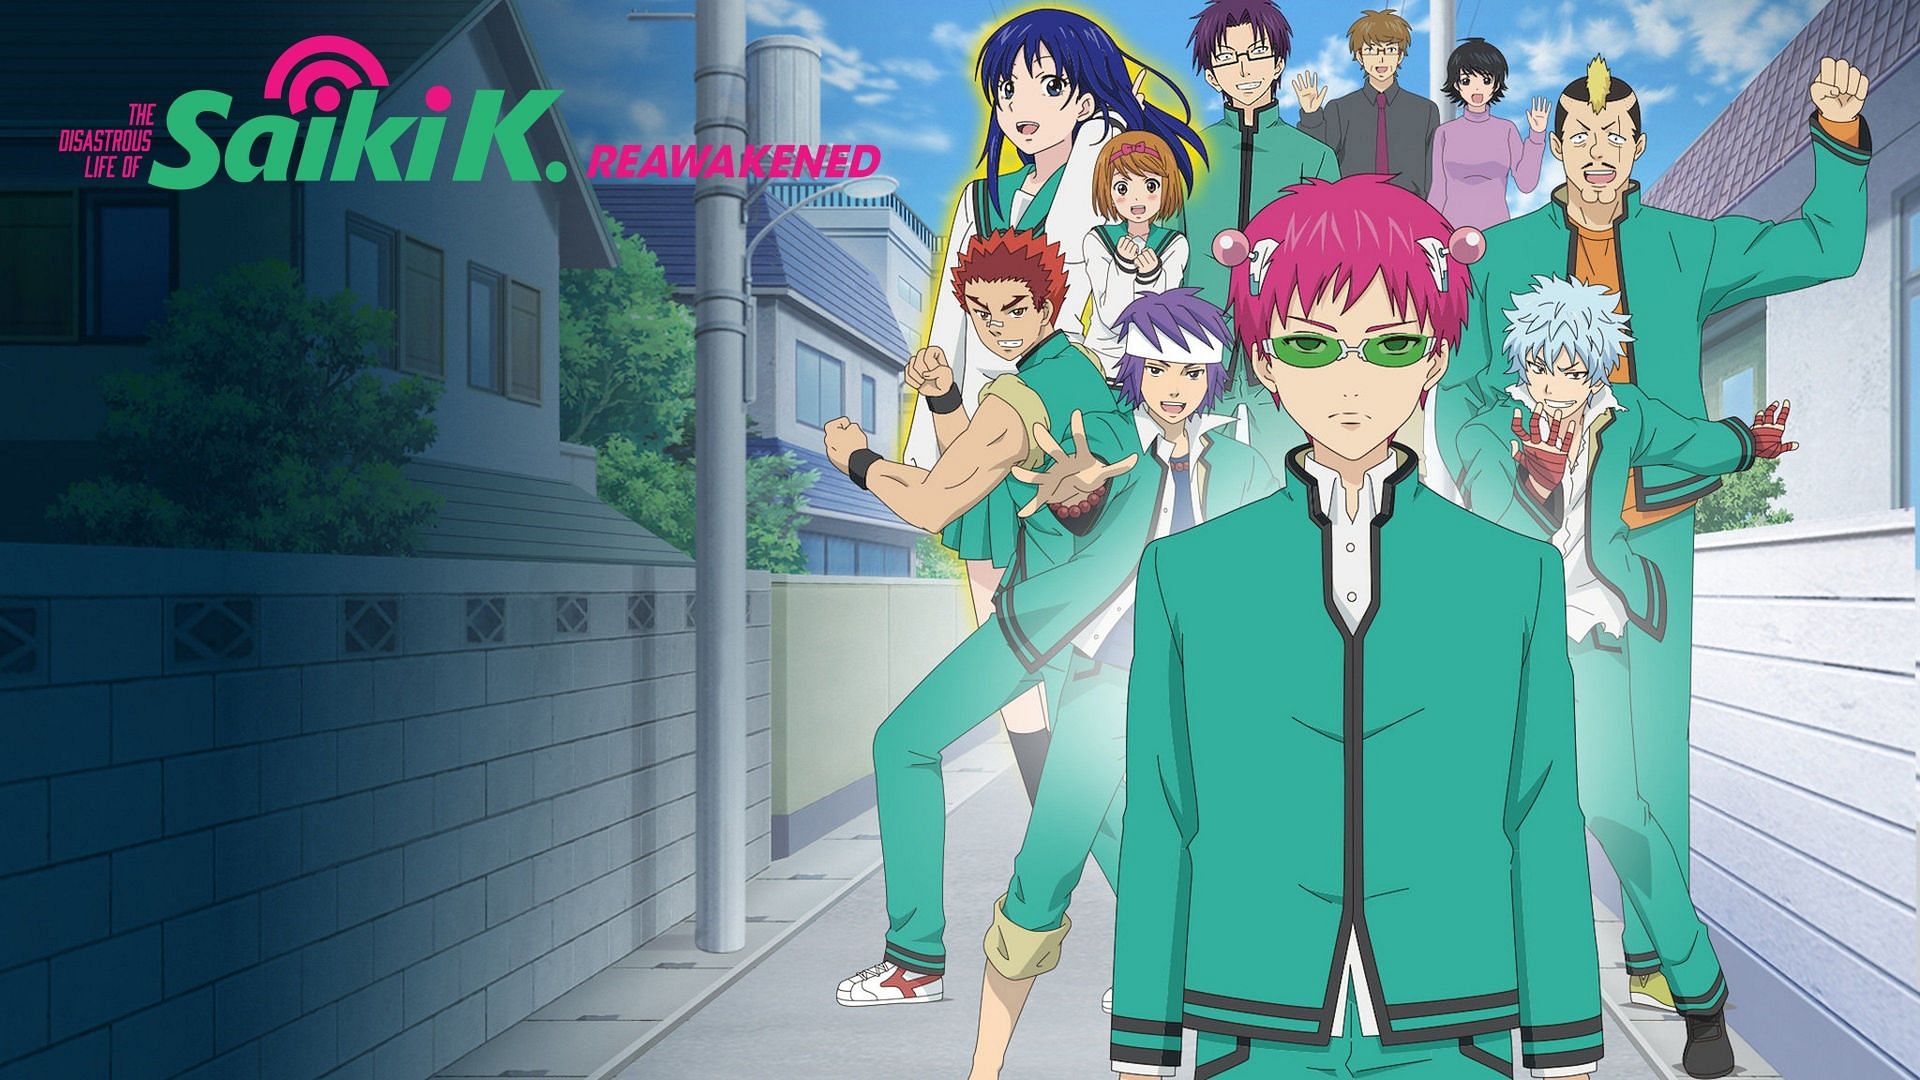 Official poster of The Disastrous Life of Saiki K series (Image via J.C. Staff and Egg Firm)